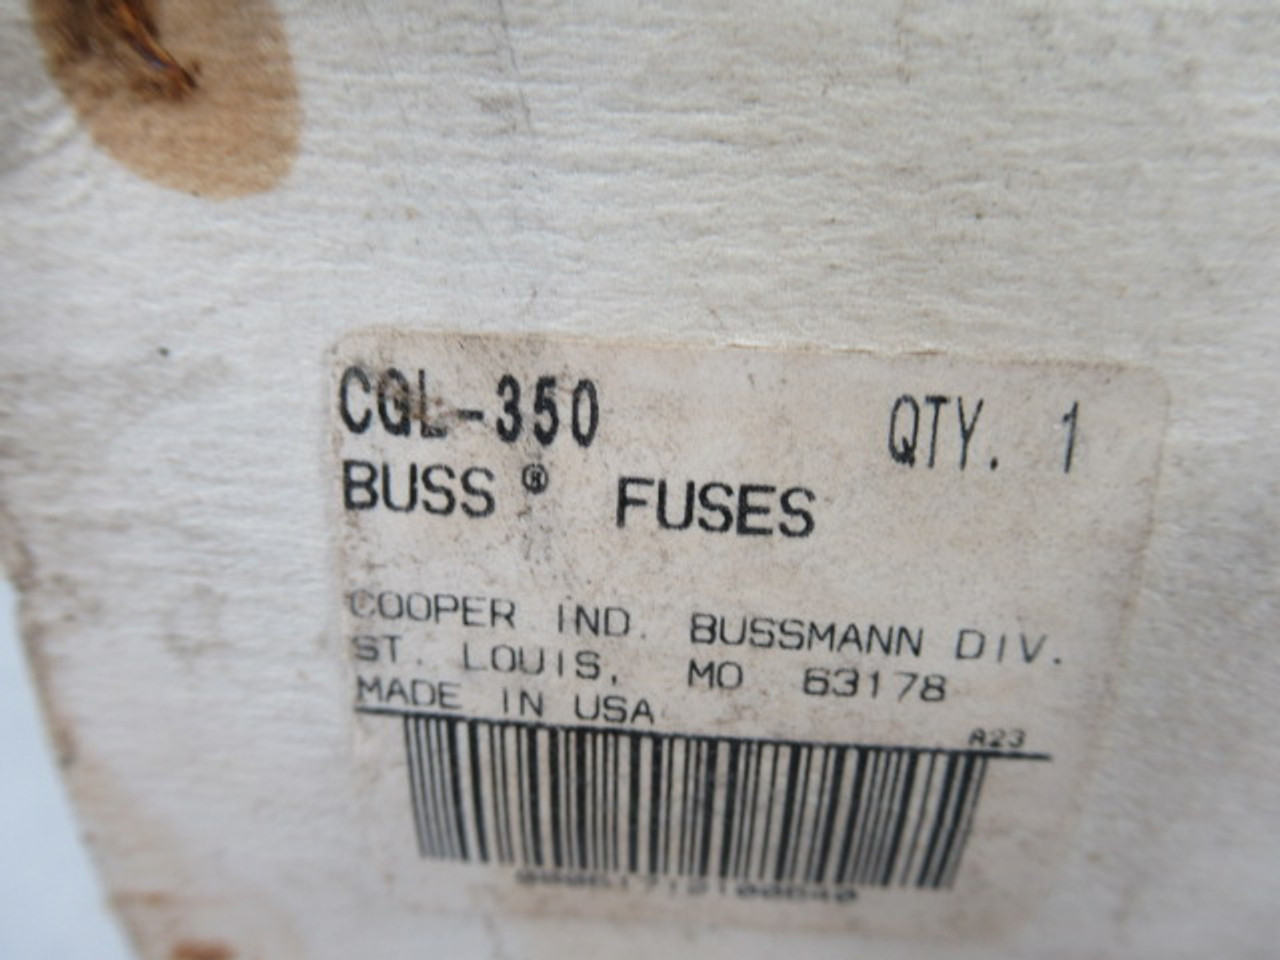 Tron CGL-350 Fusible HRC II-C Fuse 600VAC *Damaged and Stained Box* ! NEW !